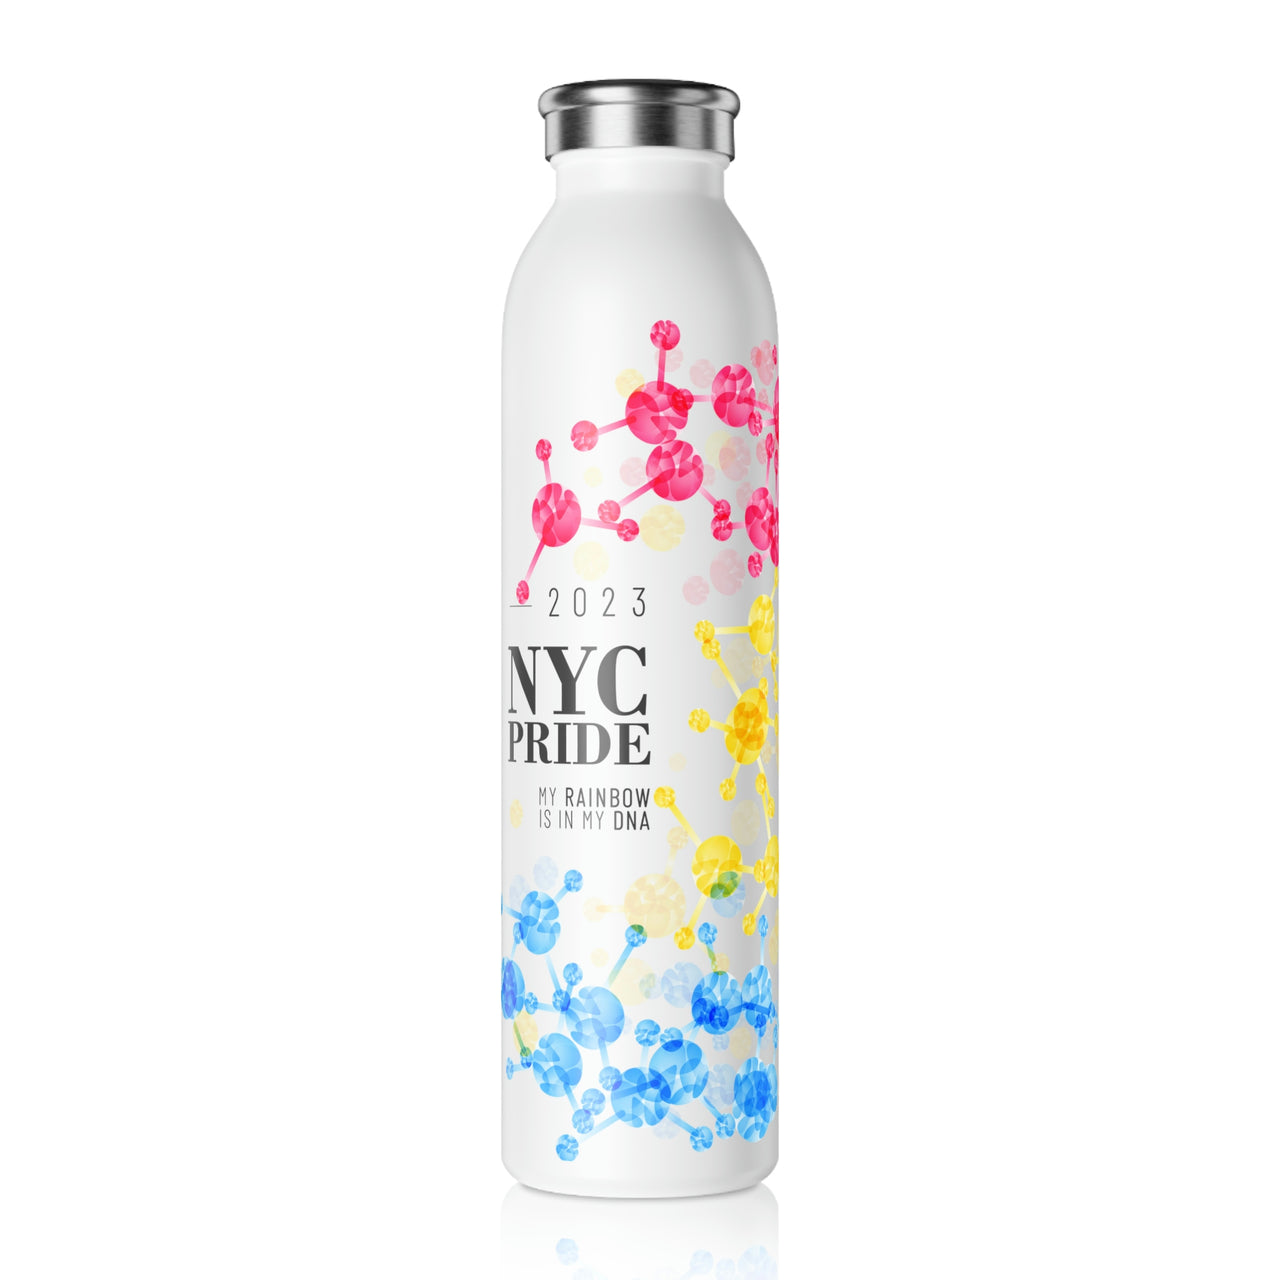 Pansexual Flag Slim Water Bottle NYC Pride - My Rainbow is In My DNA SHAVA CO